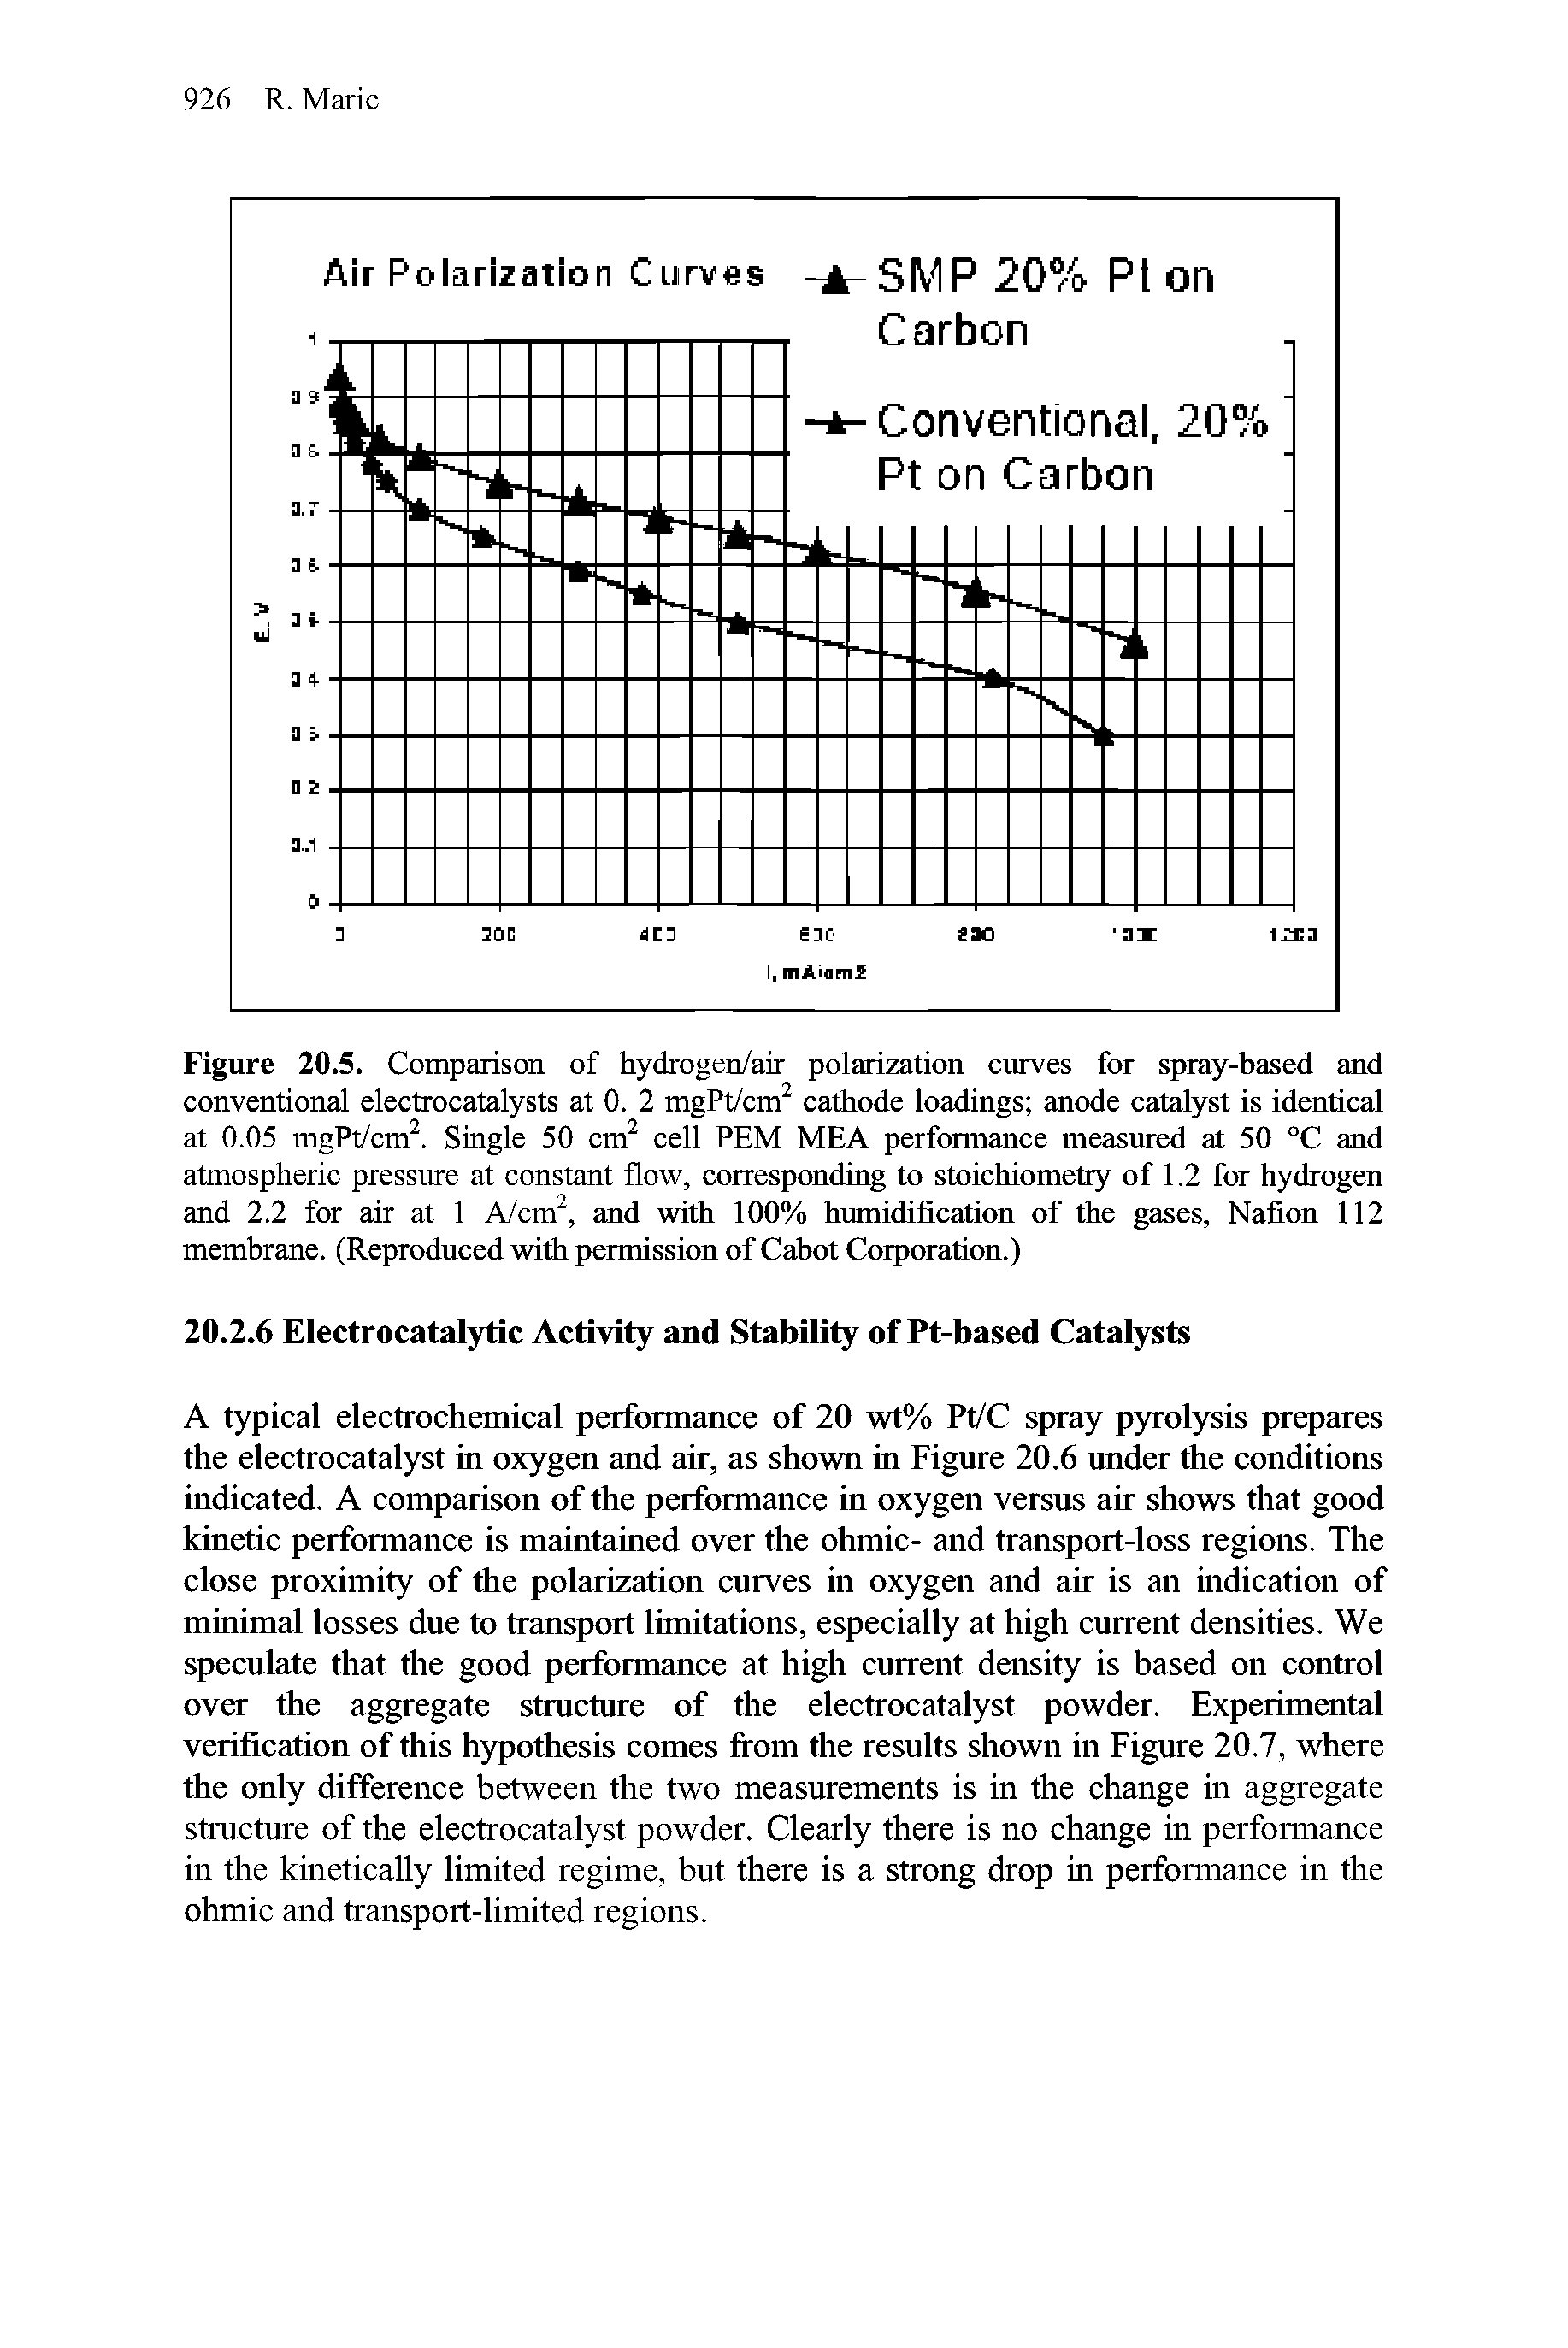 Figure 20.5. Comparison of hydrogen/air polarization curves for spray-based and conventional electrocatalysts at 0. 2 mgPt/cm cathode loadings anode catalyst is identical at 0.05 mgPt/cm. Single 50 cm cell PEM MEA performance measured at 50 °C and atmospheric pressure at constant flow, corresponding to stoichiometry of 1.2 for hydrogen and 2.2 for air at 1 A/cm, and with 100% humidification of the gases, Nafion 112 membrane. (Reproduced with permission of Cabot Corporation.)...